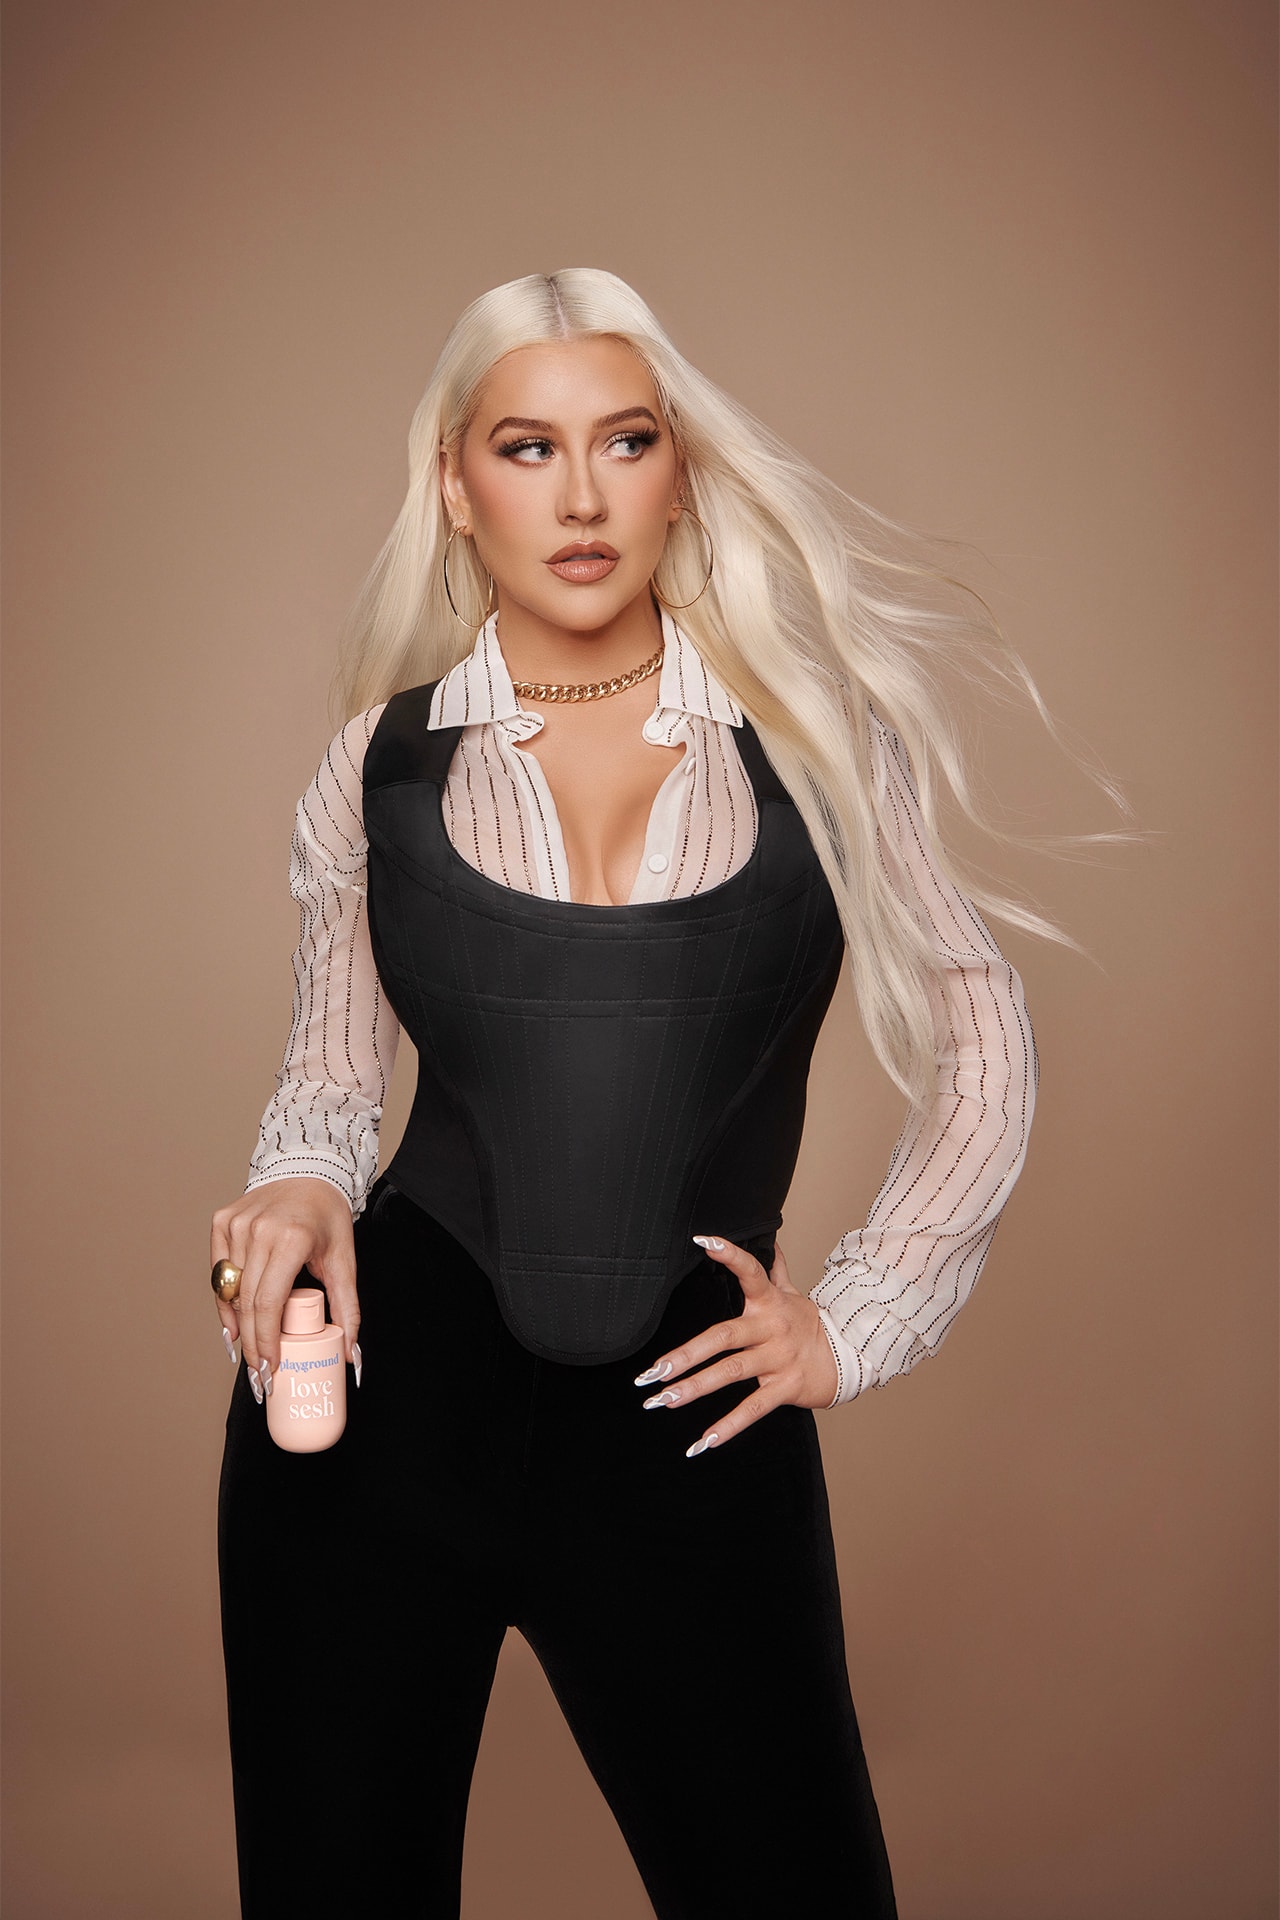 What Is Christina Aguilera Wearing?